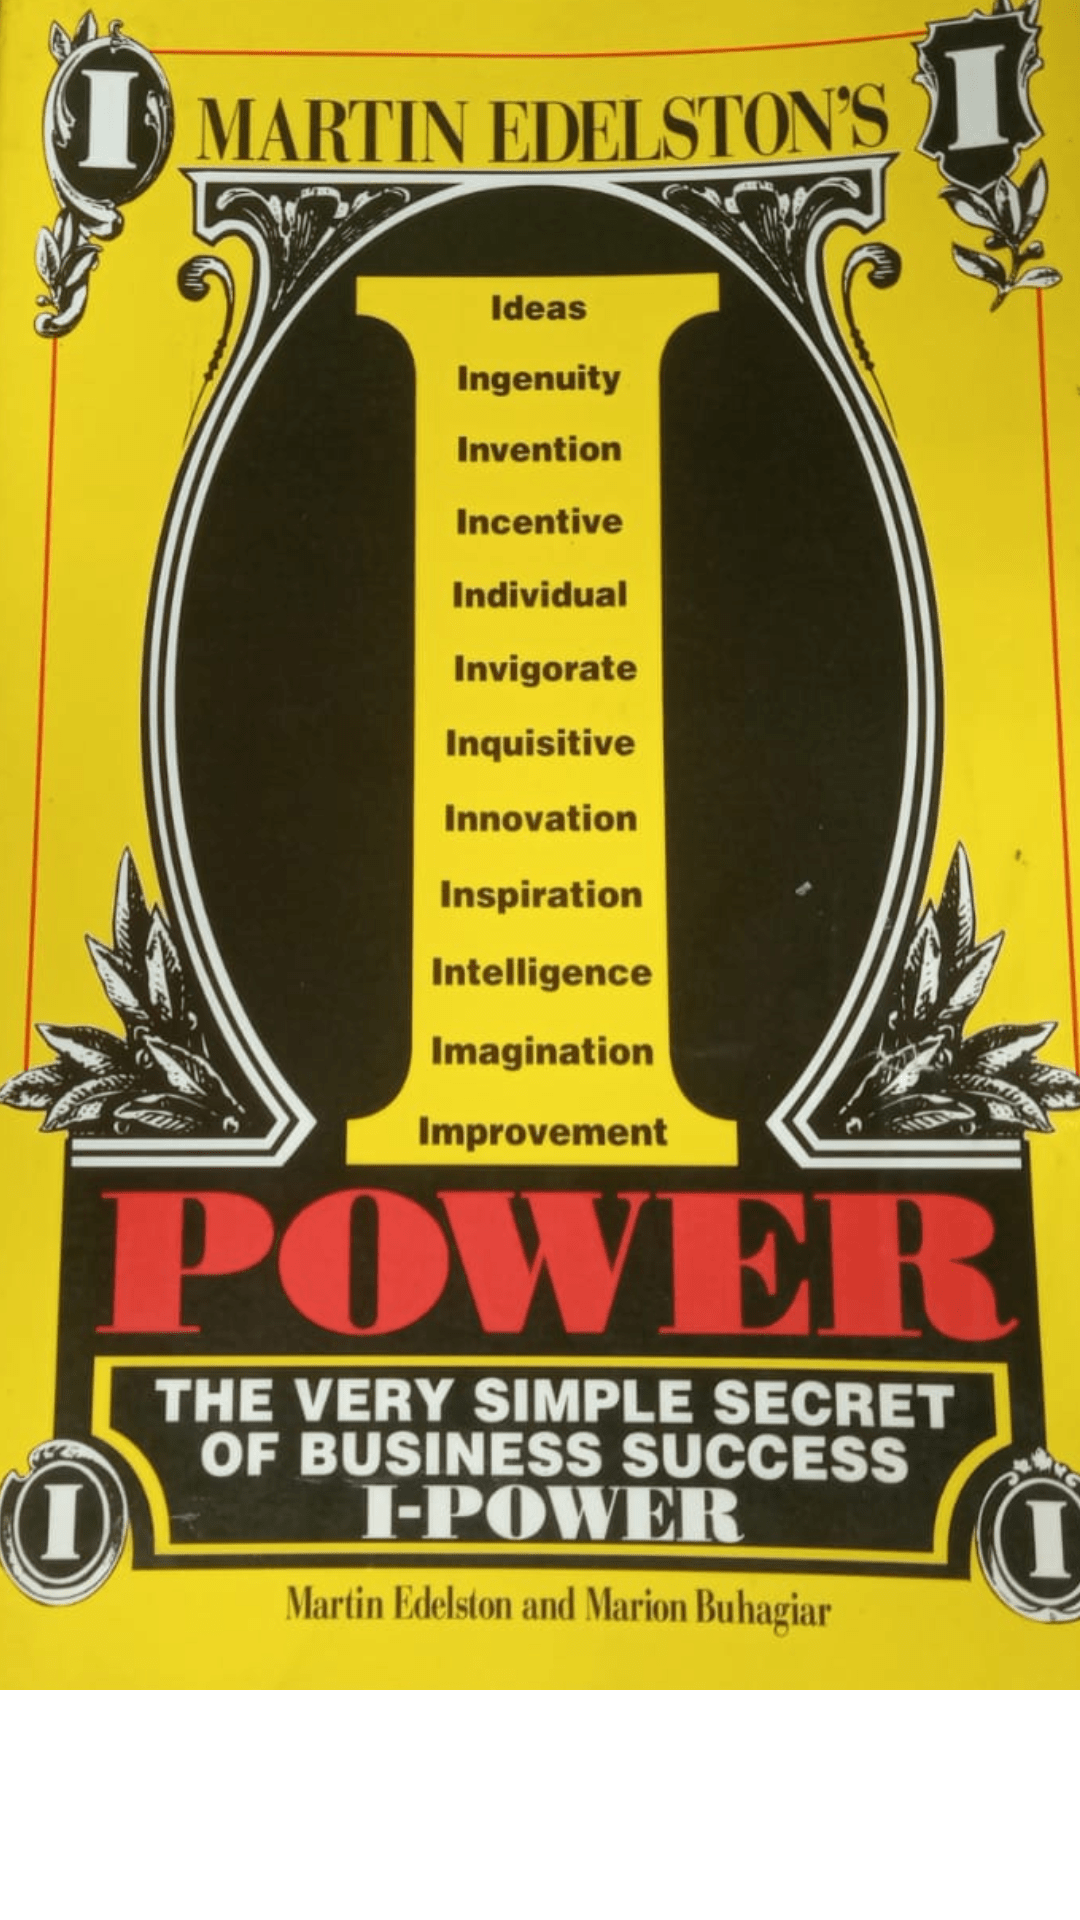 I-Power: The secrets Of Great Business In Bad Times